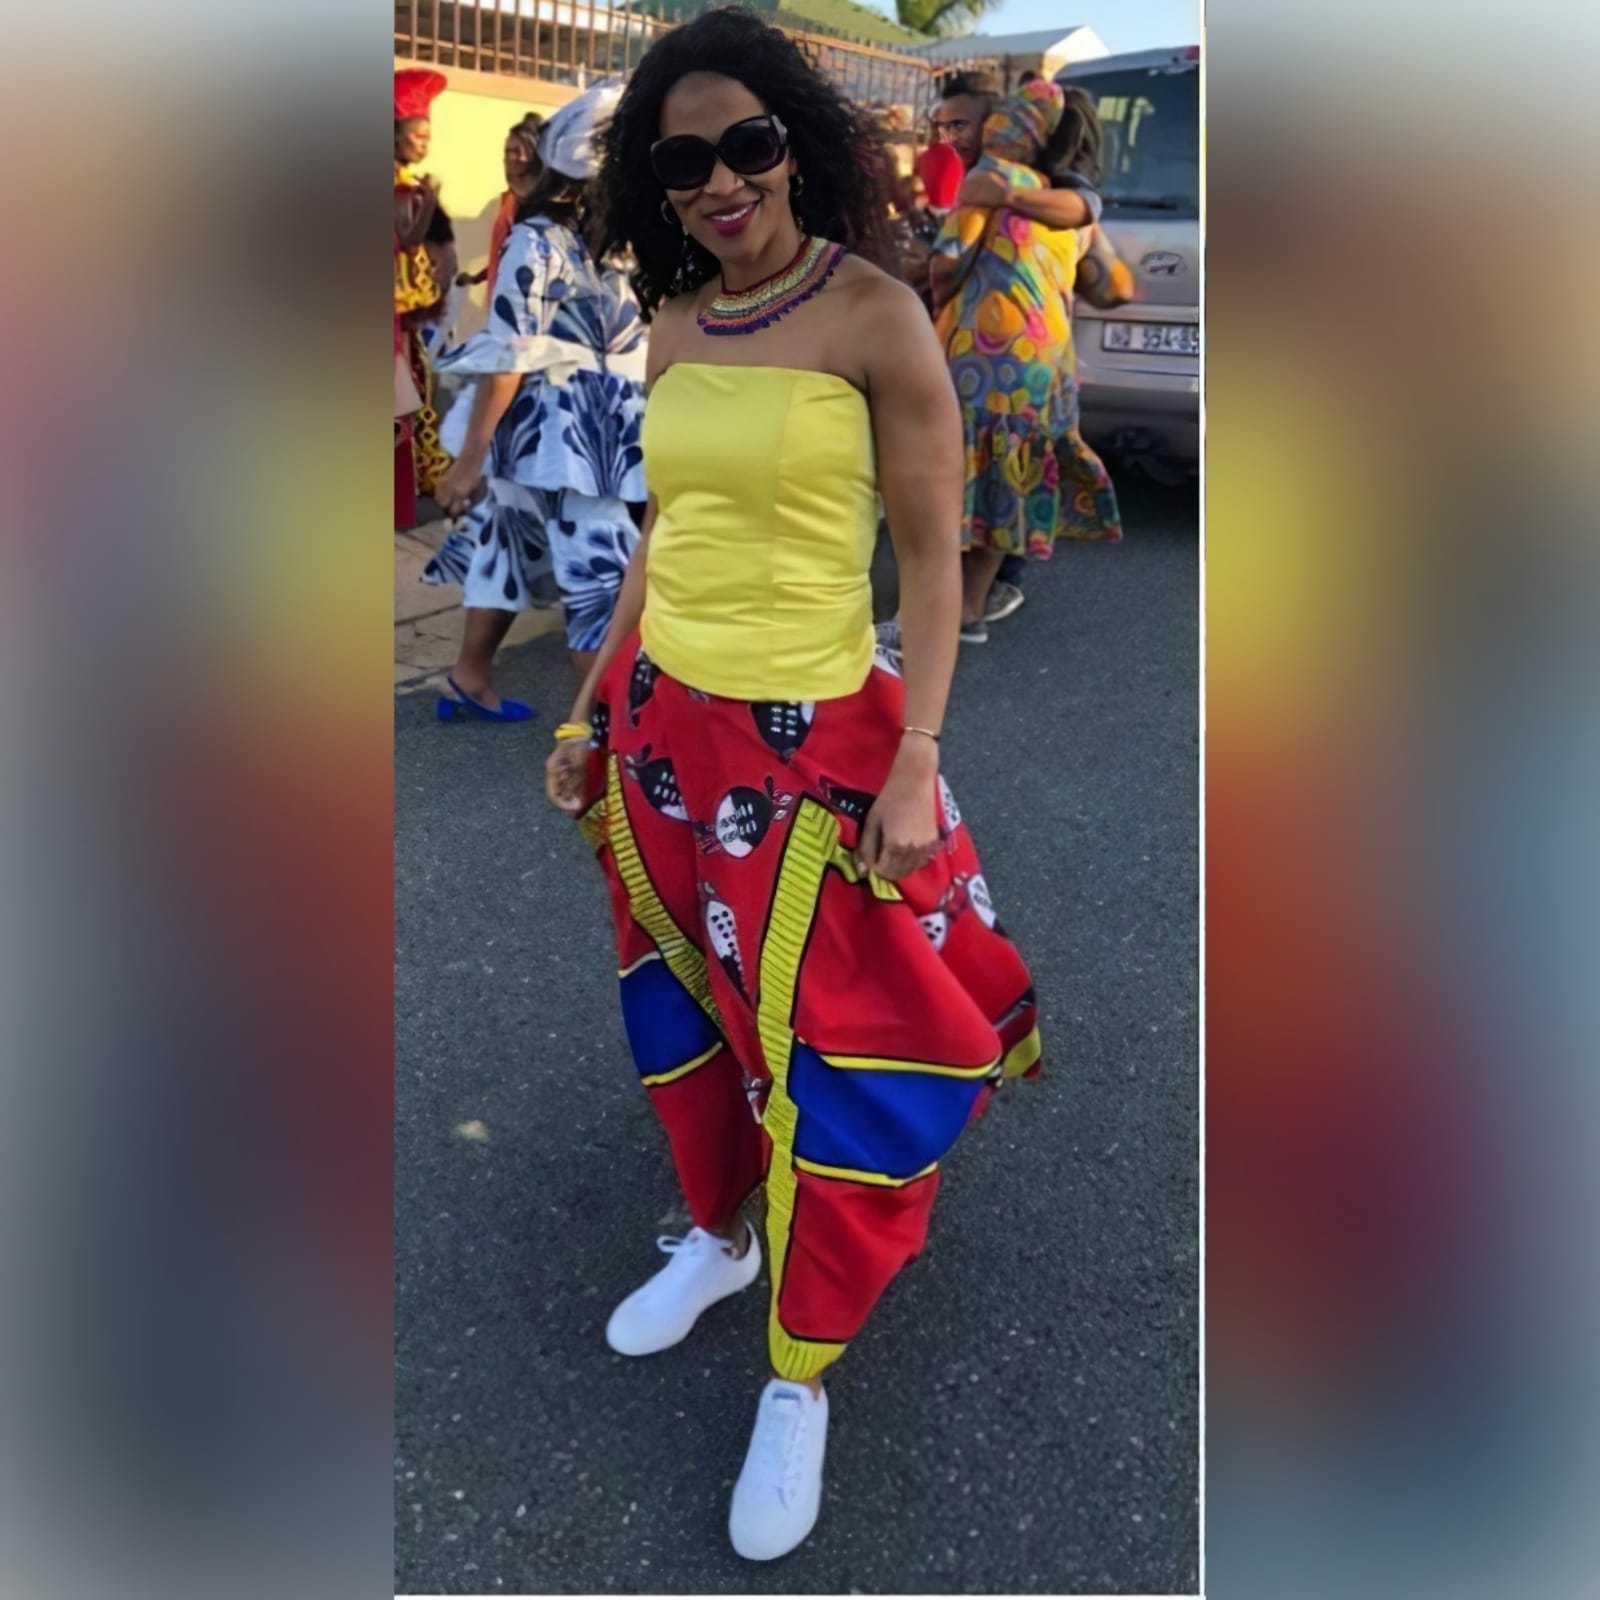 African traditional 2 piece outfit skirt and top 4 african traditional 2 piece outfit skirt and top. Red swati wide skirt with a high waisted effect. Boobtube yellow satin top with a lace-up back